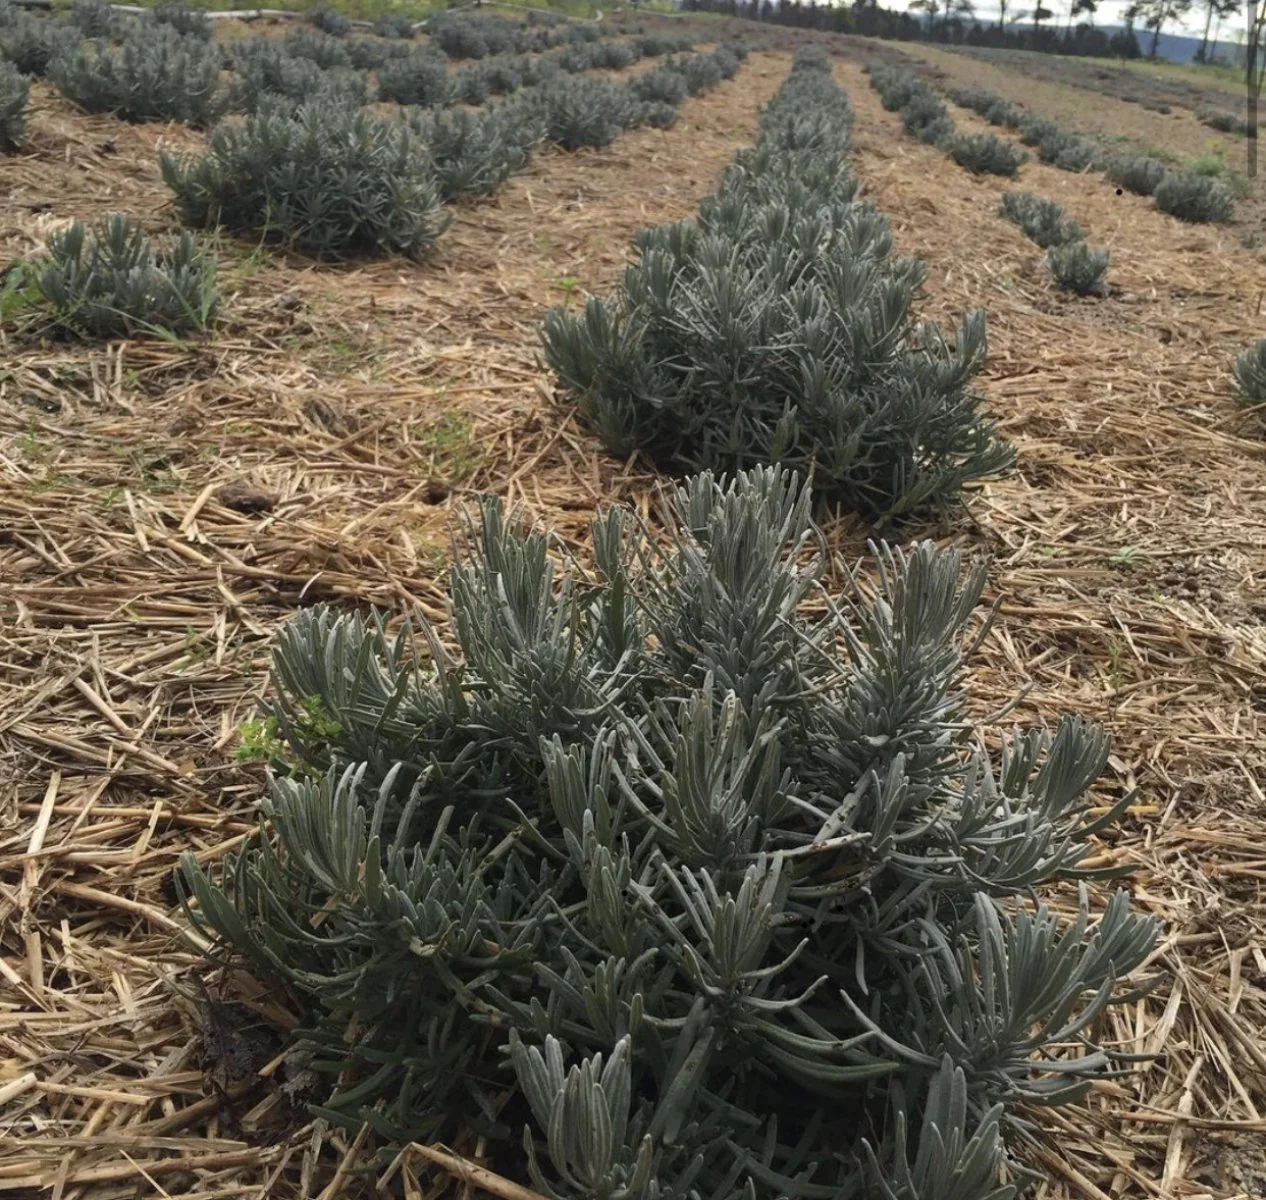 Rosemary verbenone with needle-like leaves, planted in rows across a large open field.